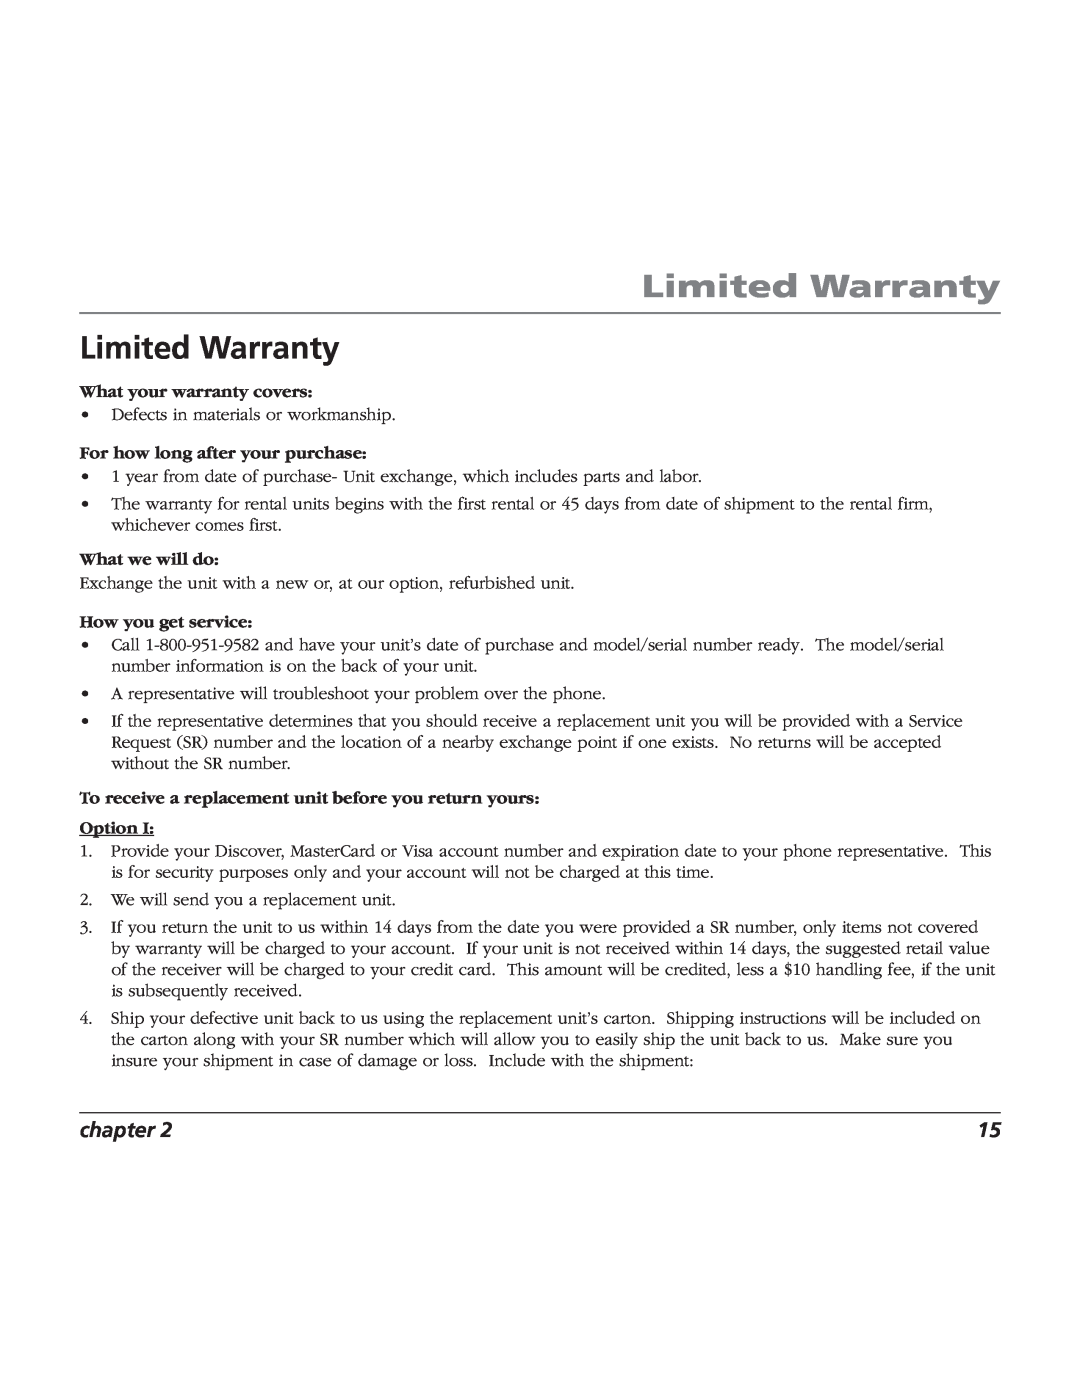 RCA BLC524 user manual Limited Warranty, chapter 